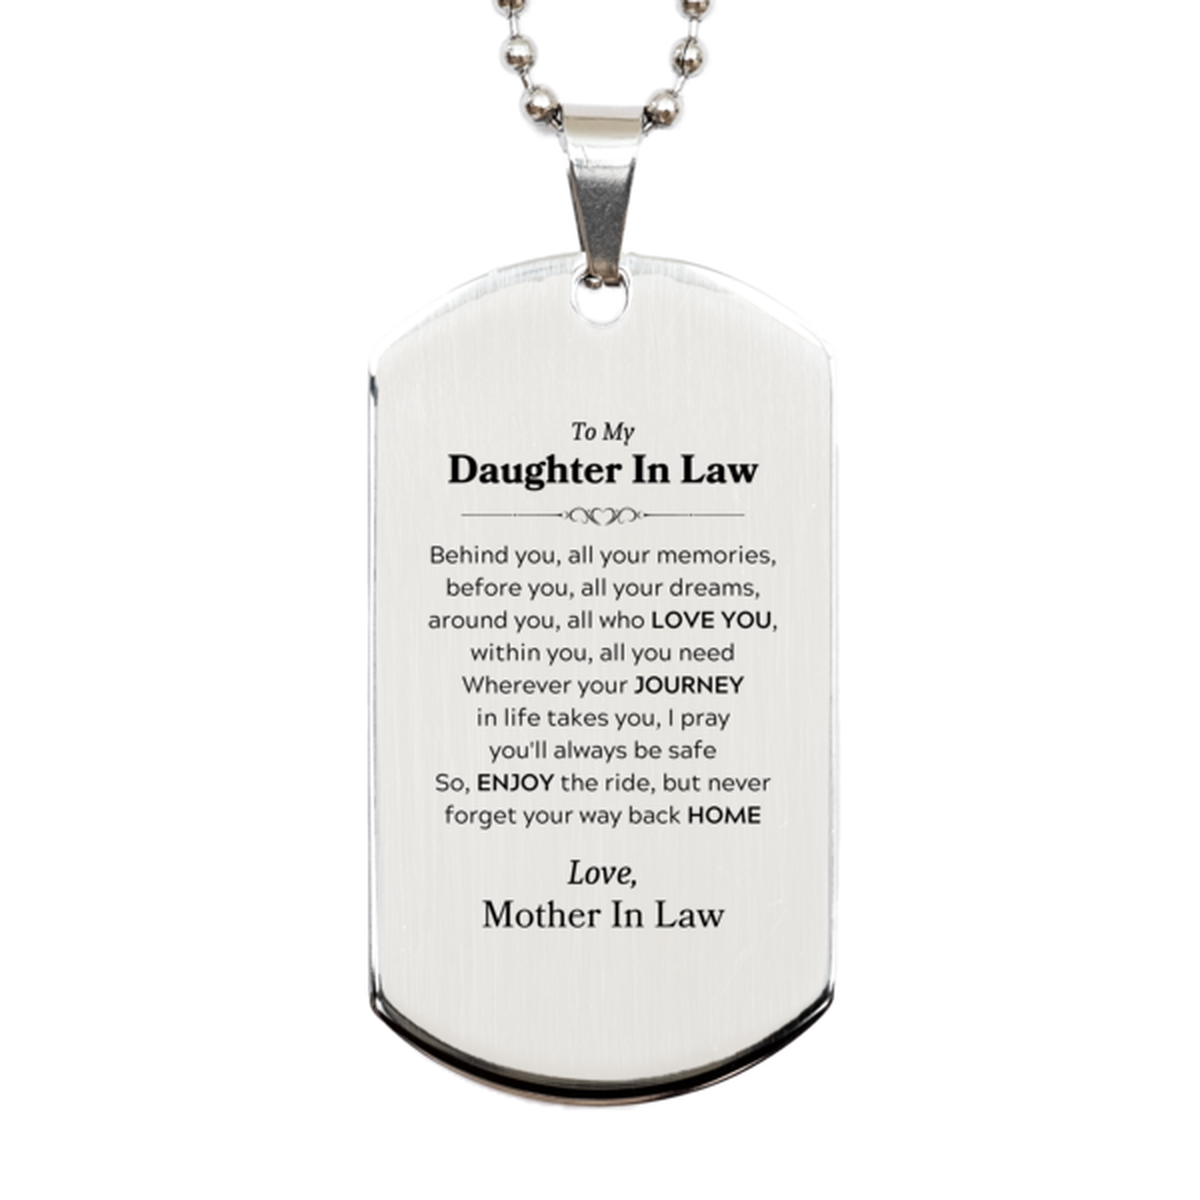 To My Daughter In Law Graduation Gifts from Mother In Law, Daughter In Law Silver Dog Tag Christmas Birthday Gifts for Daughter In Law Behind you, all your memories, before you, all your dreams. Love, Mother In Law